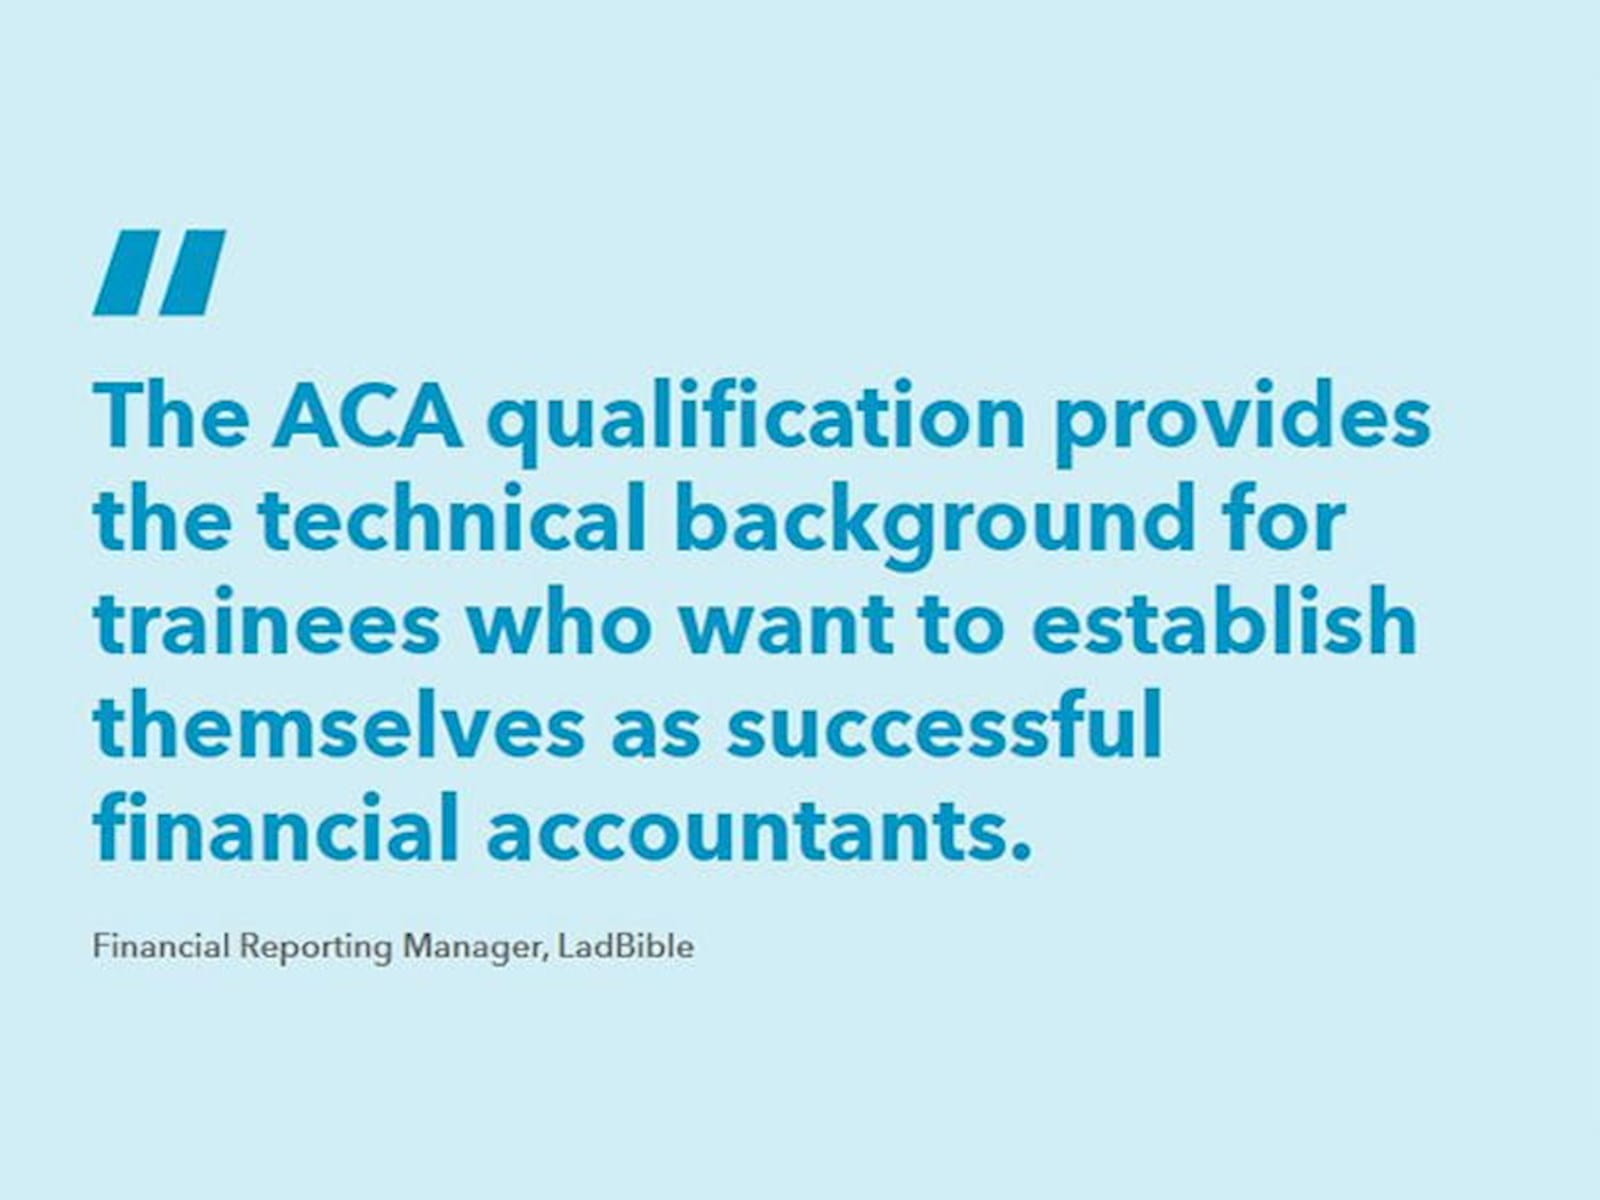 A quotation: "The ACA qualification provides the technical background for trainees who want to establish themselves as successful financial accountants" - Financial Reporting Manager, LadBible